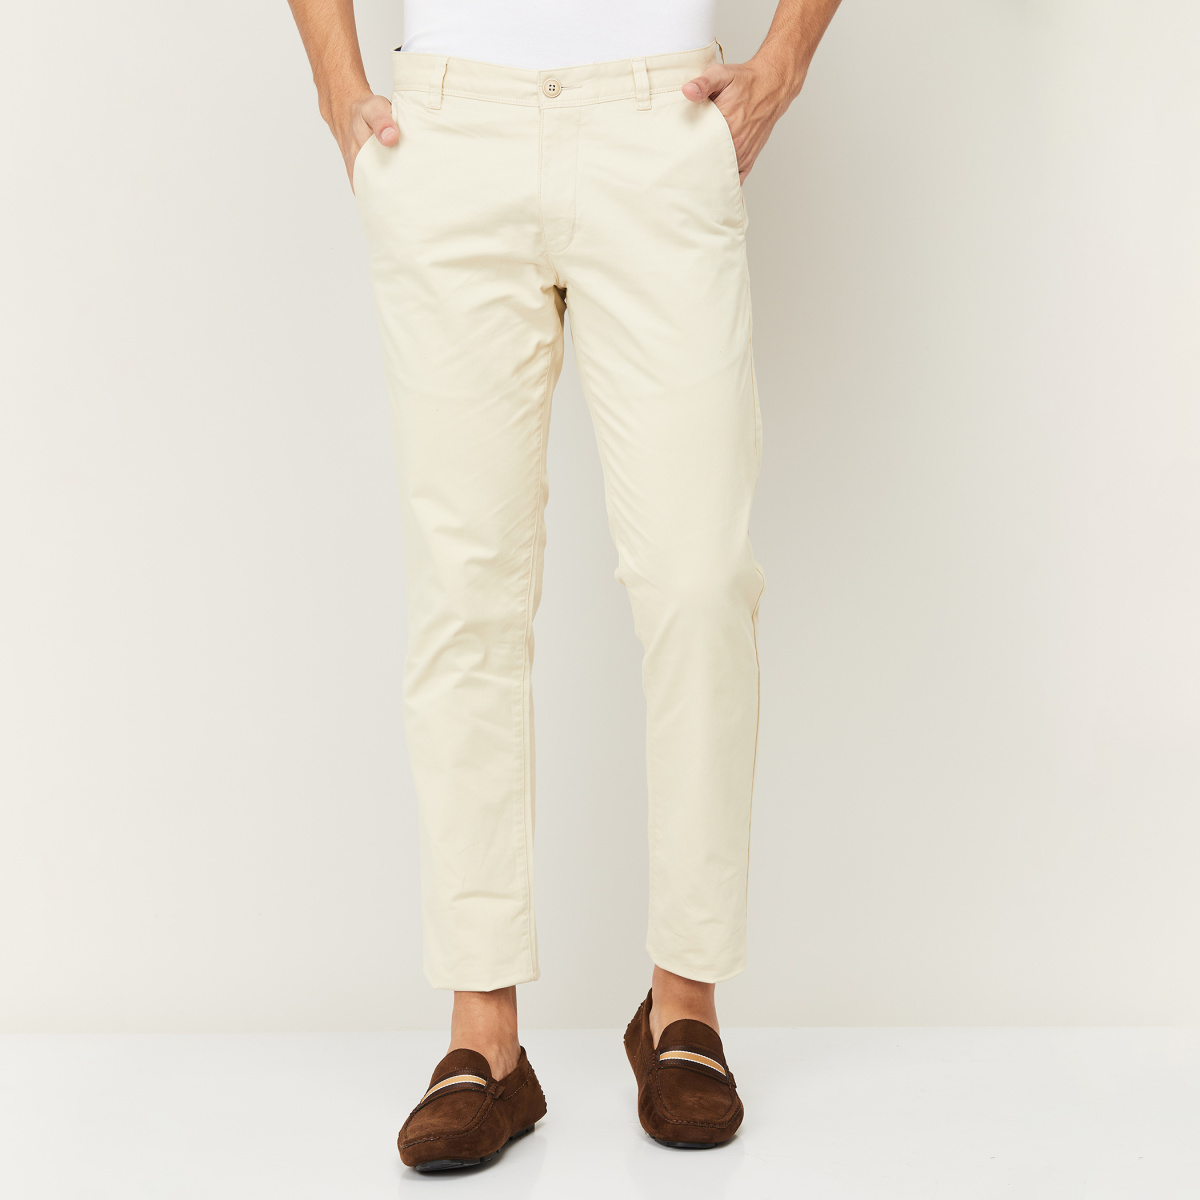 Buy ARROW Grey Mens Flat Front Regular Fit Trousers | Shoppers Stop